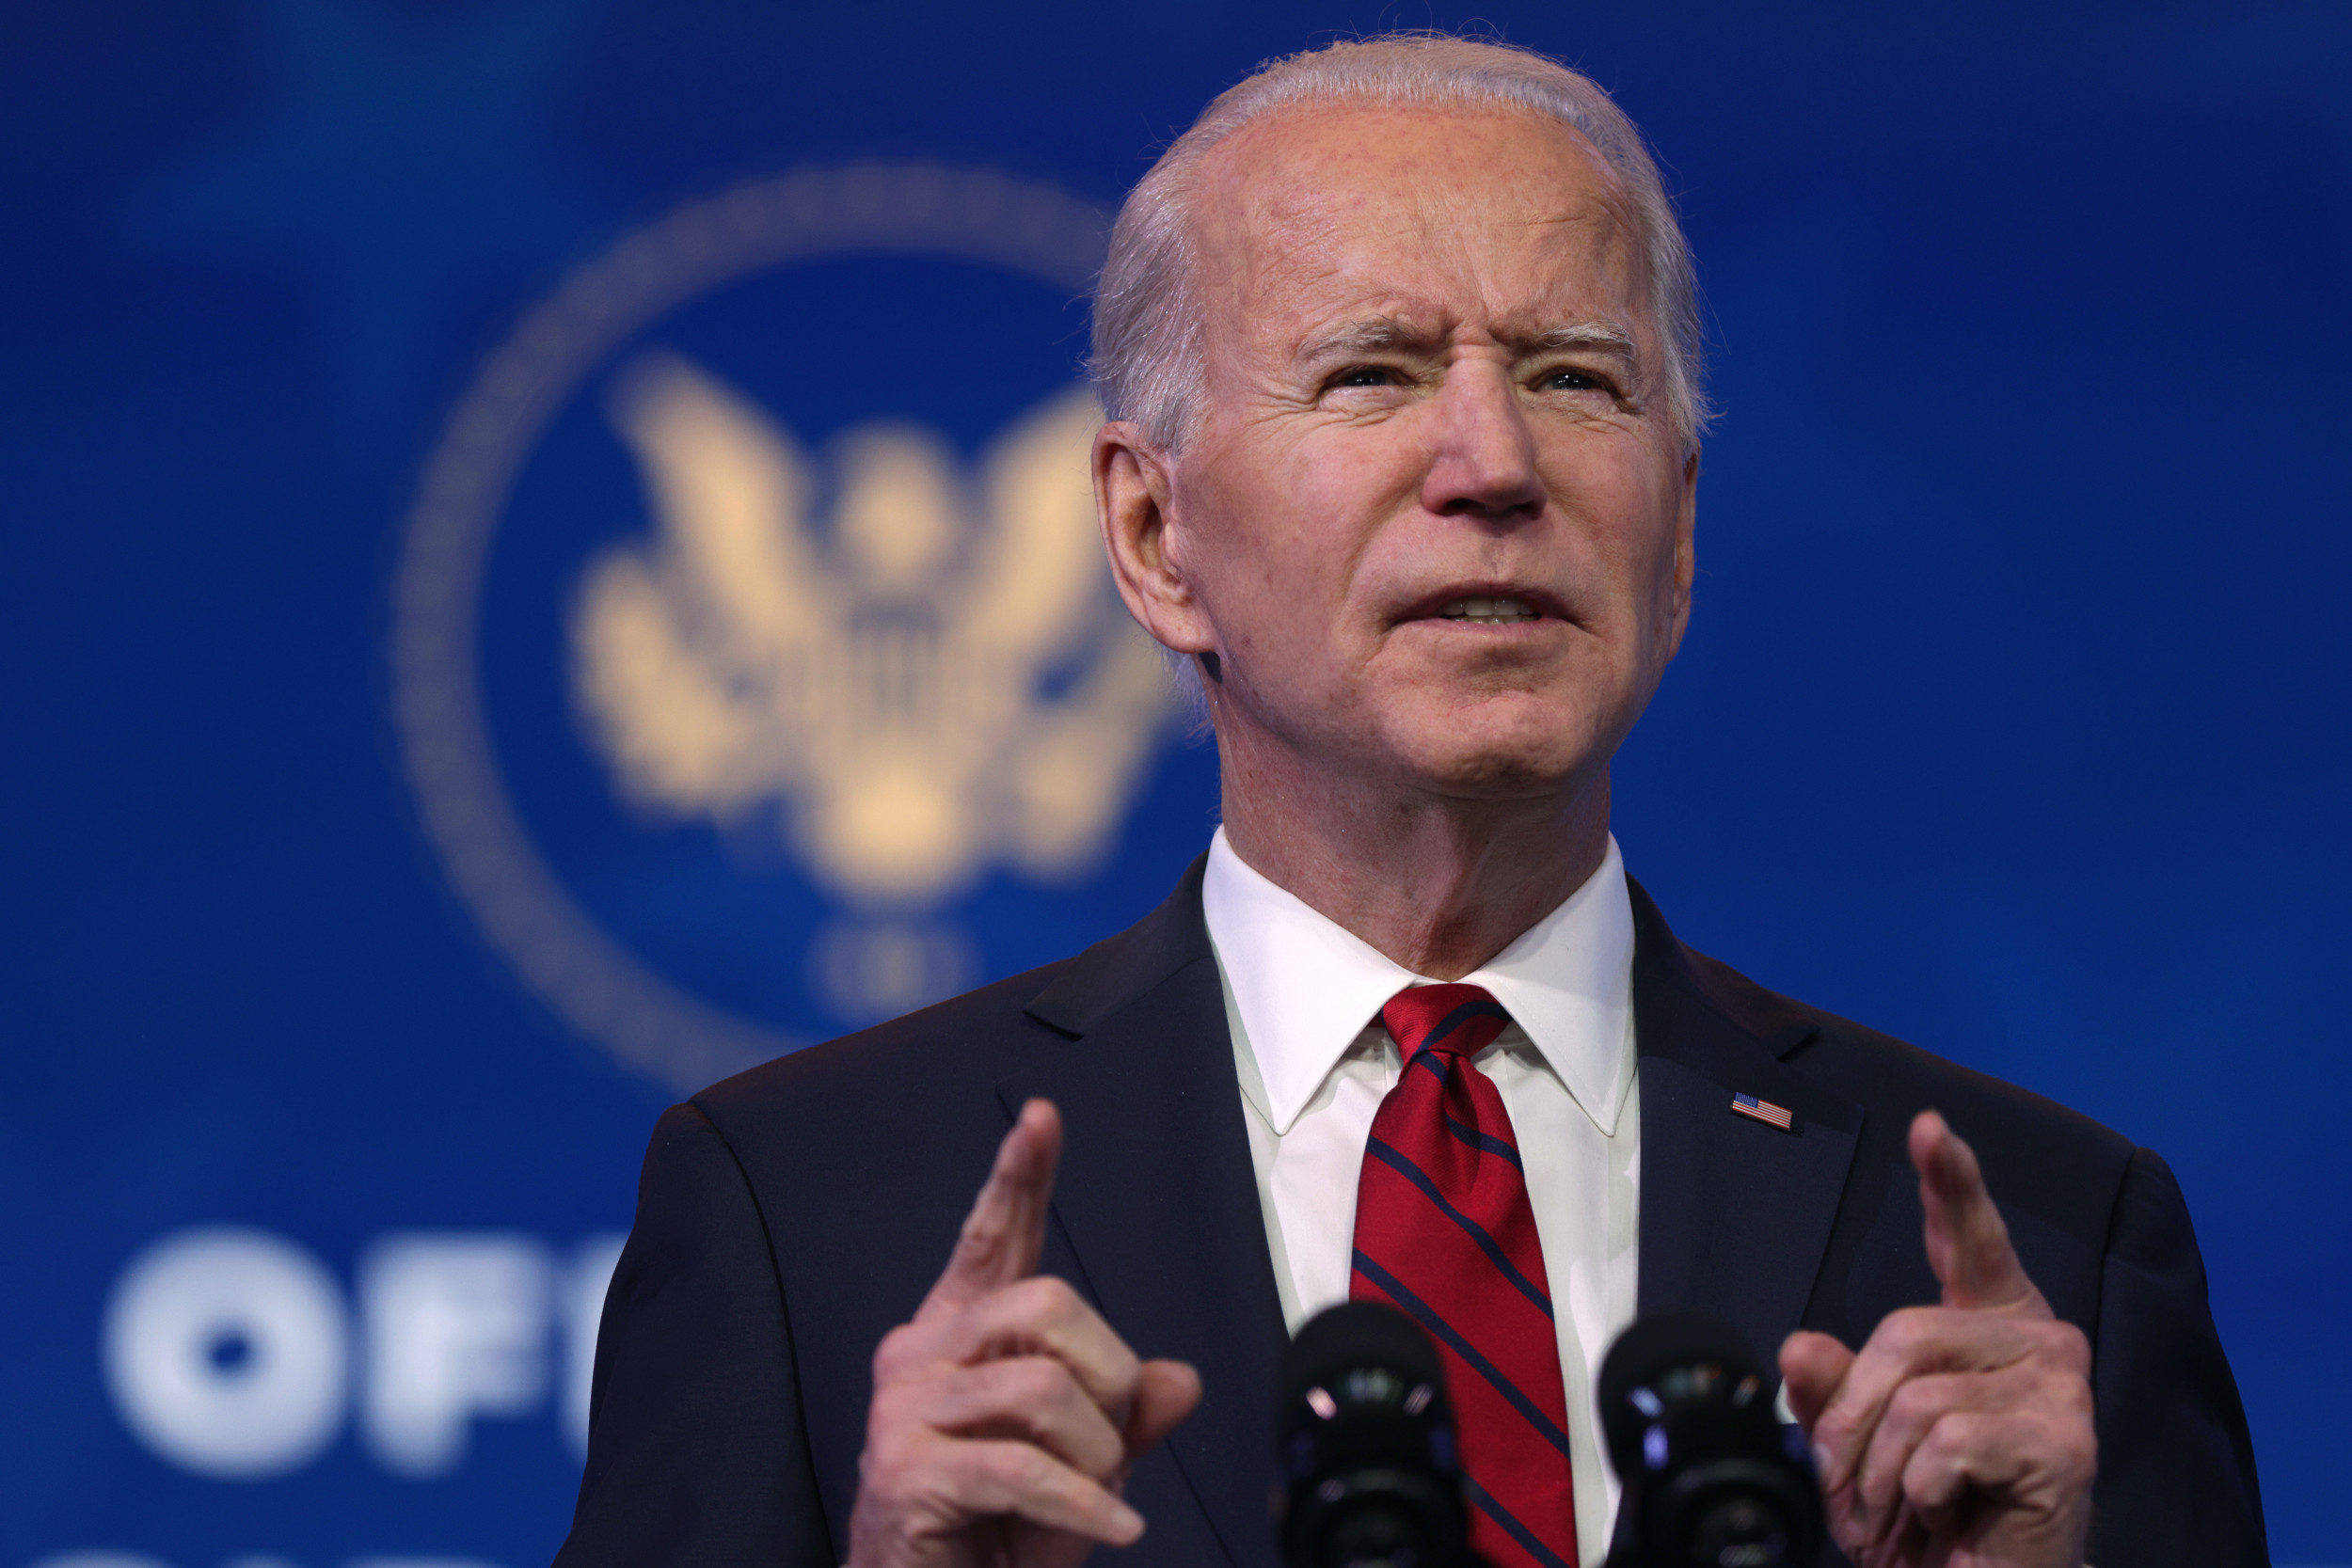 Joe Biden launches Future @POTUS account amid a fight with Twitter, ‘Hey guys’